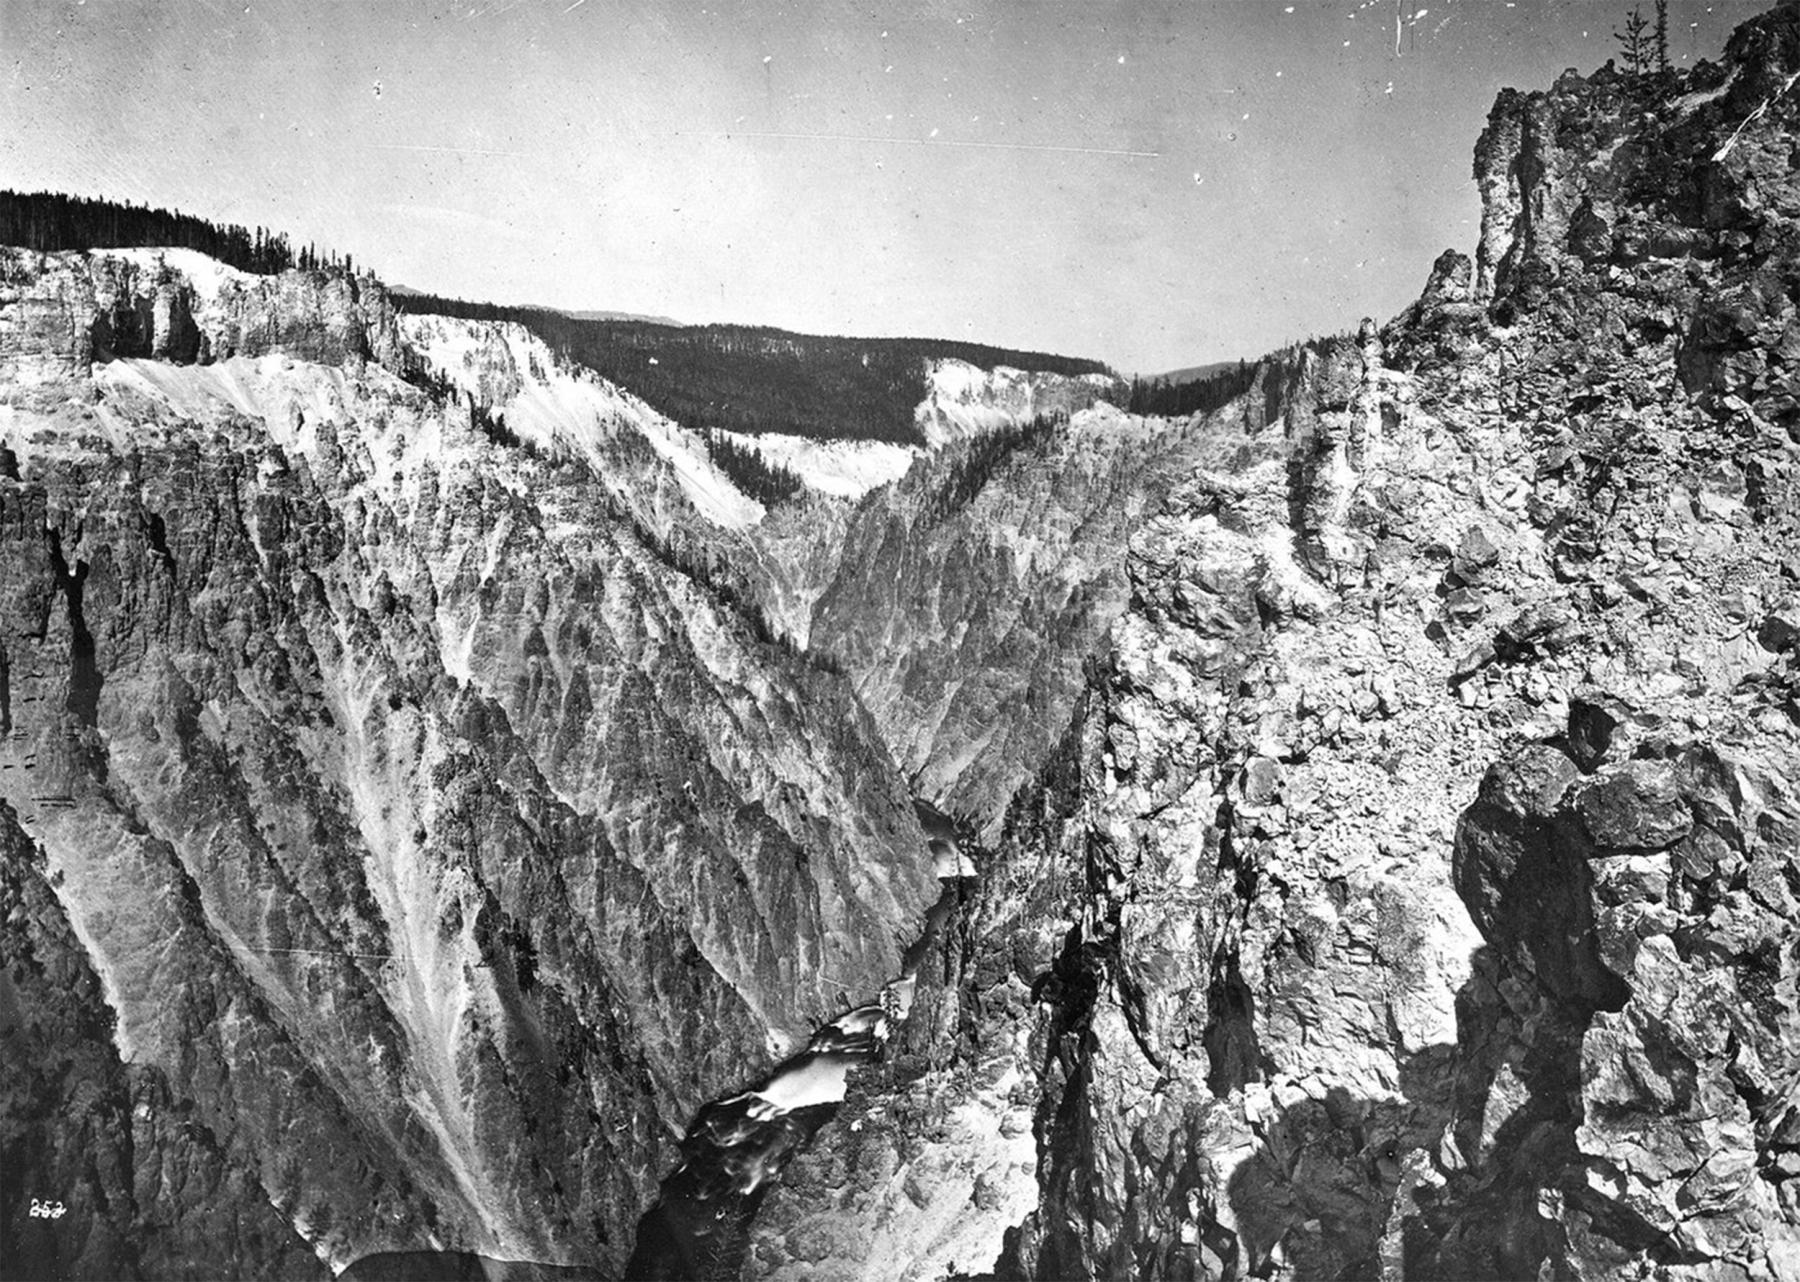 The Hayden Expedition stopped for several days at the Grand Canyon of the Yellowstone, where Thomas Moran and William Henry Jackson spent time sketching and photographing. This Jackson photo looks down river from the east side of the canyon, a mile below the lower falls. William Henry Jackson, 1871, U.S. Geological and Geographical Survey of the Territories (Hayden Survey). Wikipedia.